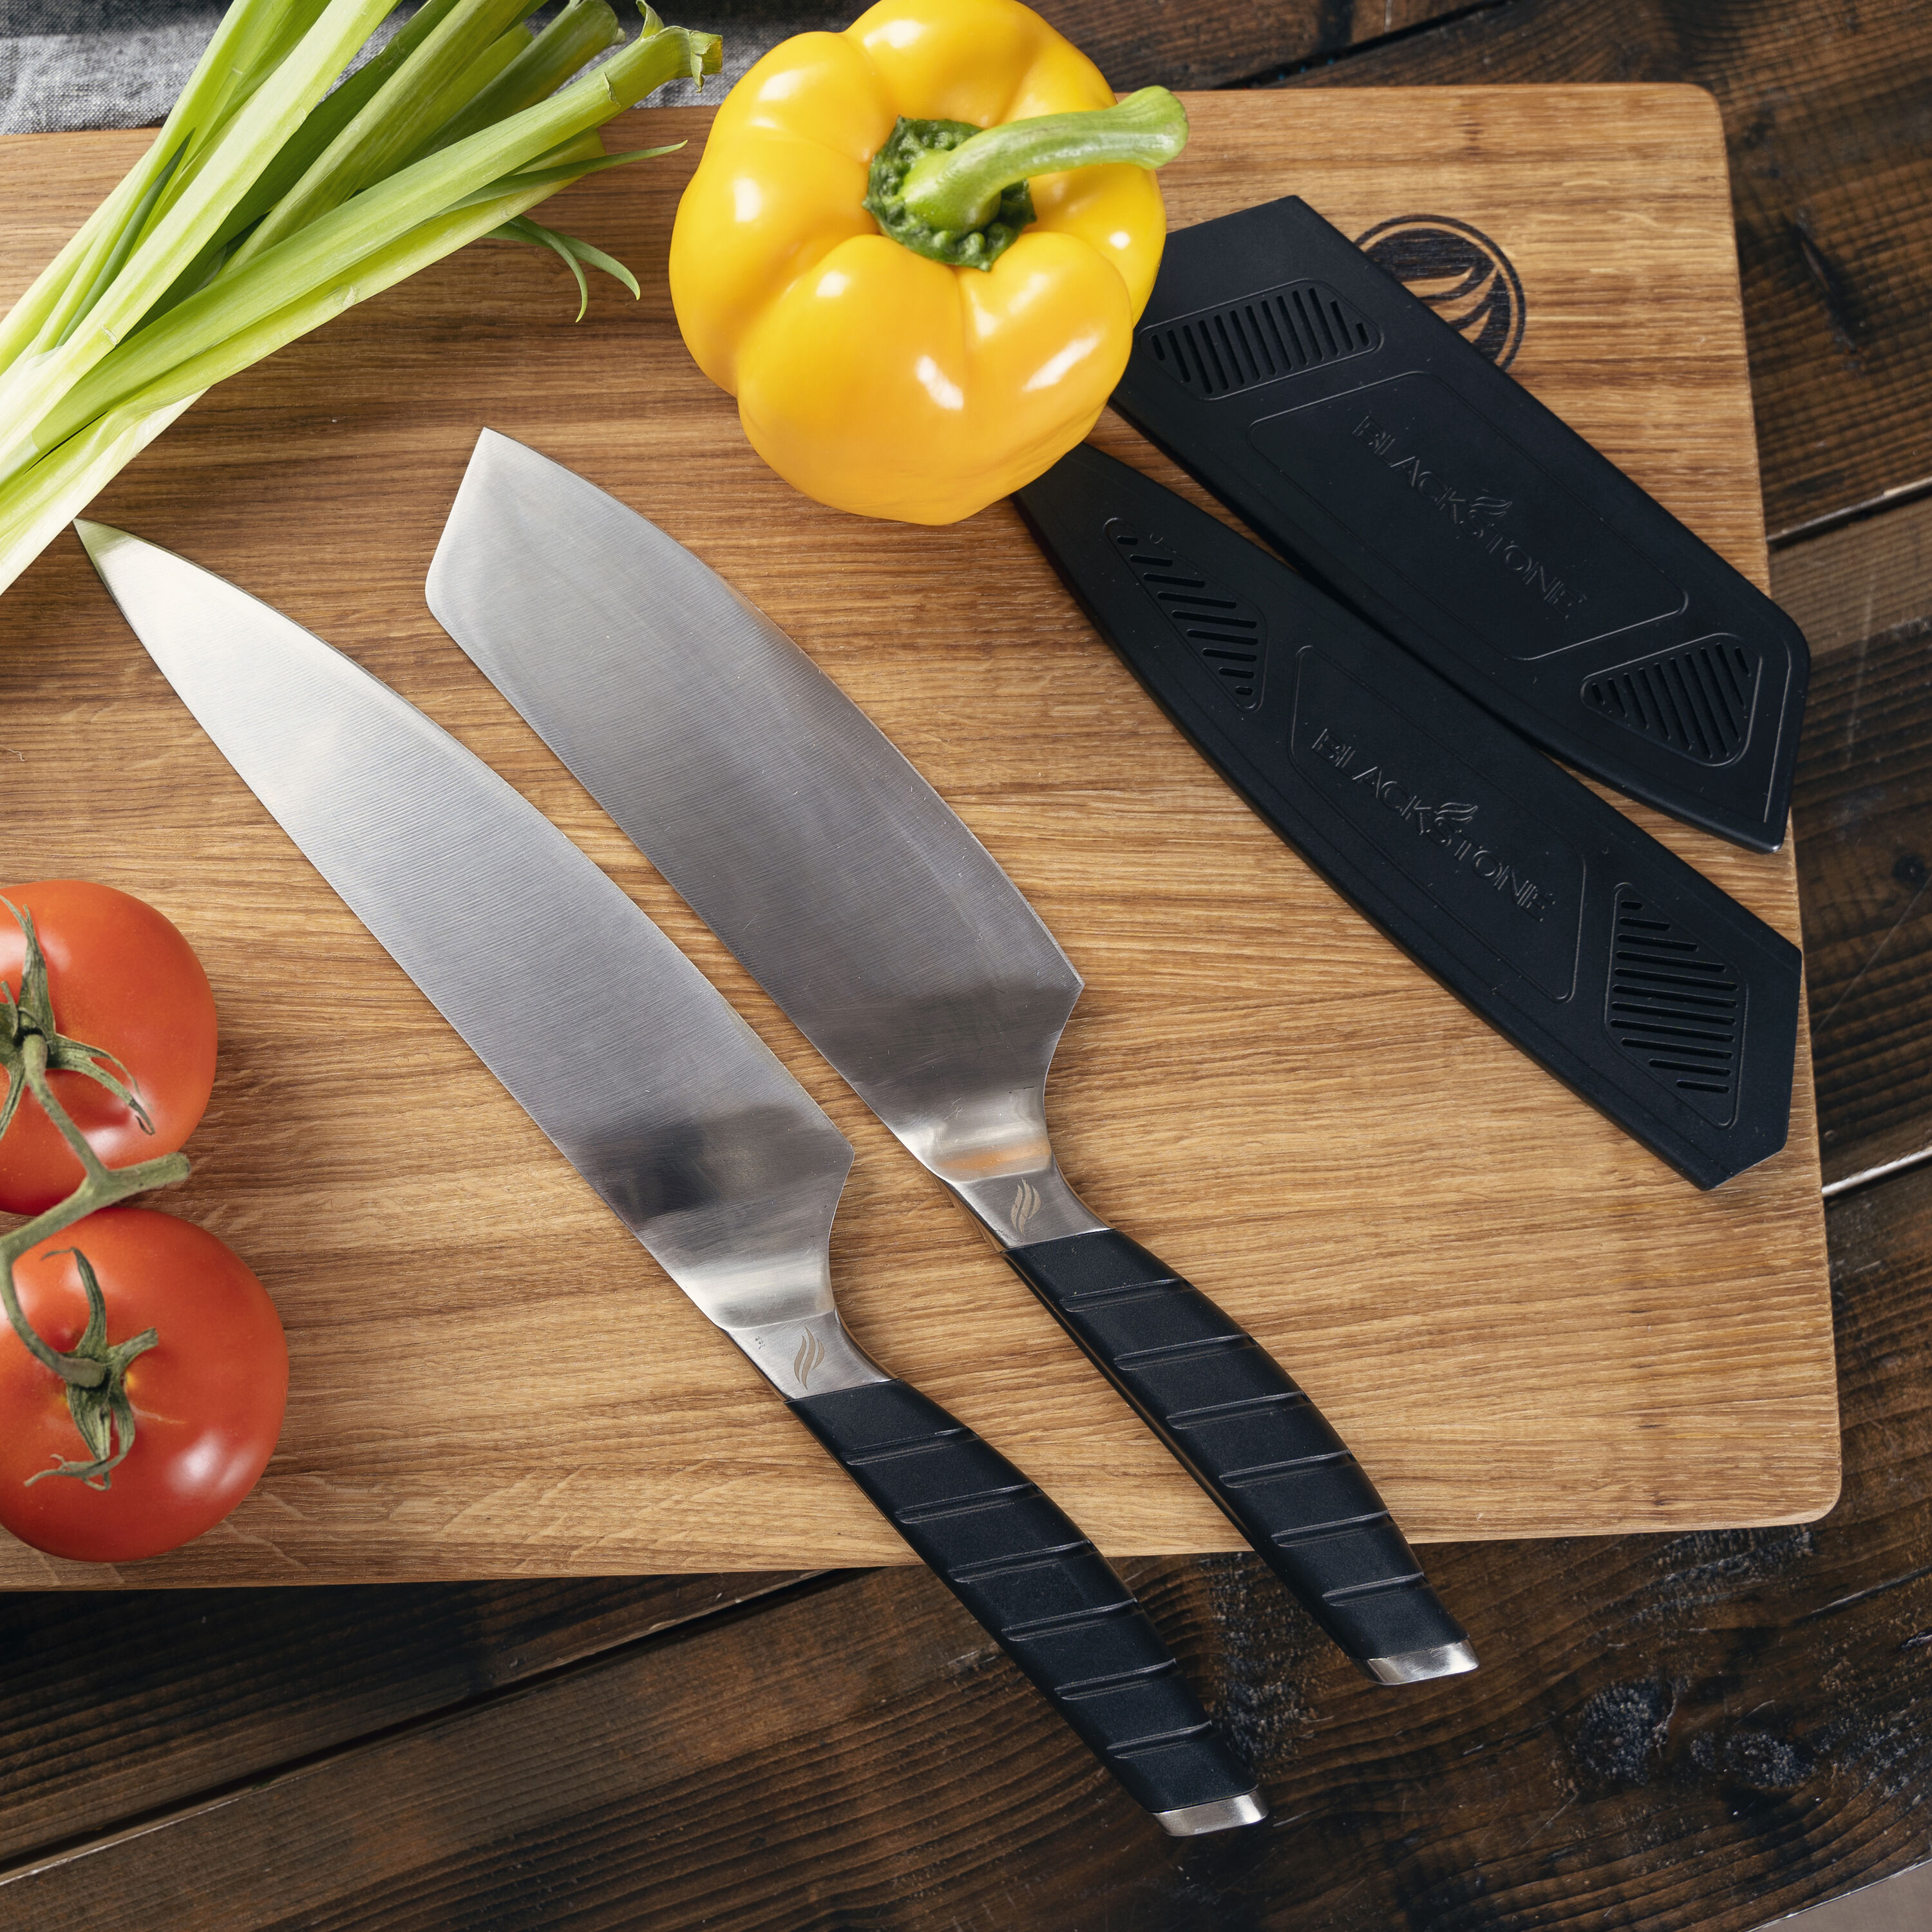 Blackstone Knives with Blade Covers Stainless Steel Tool Set